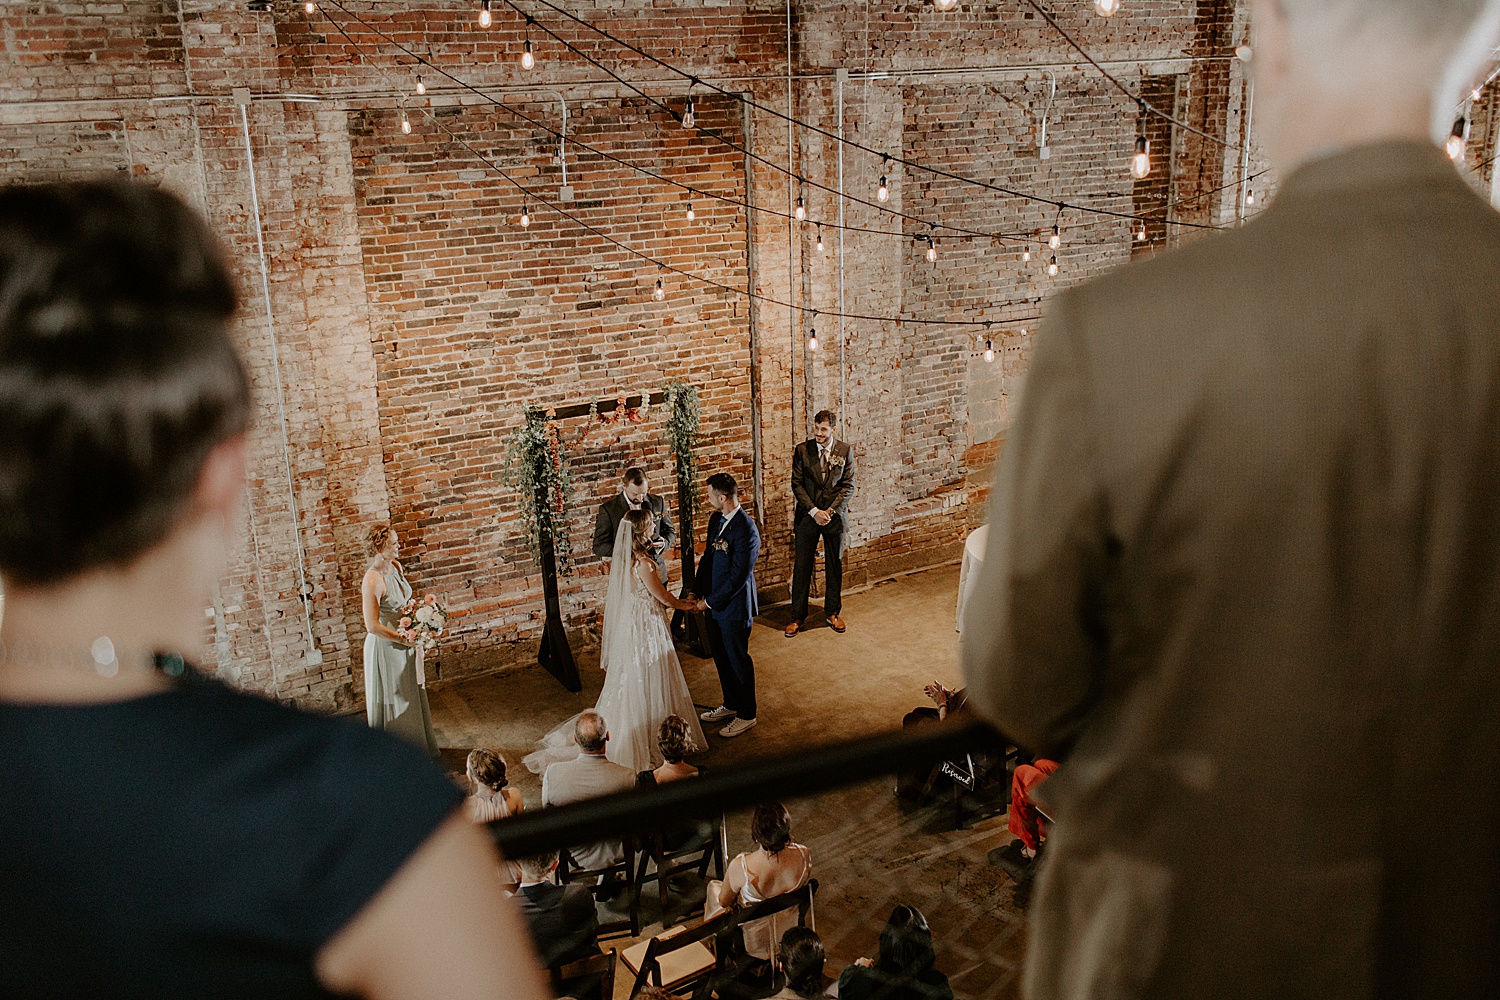 Couple standing together during ceremony at Wild Carrot